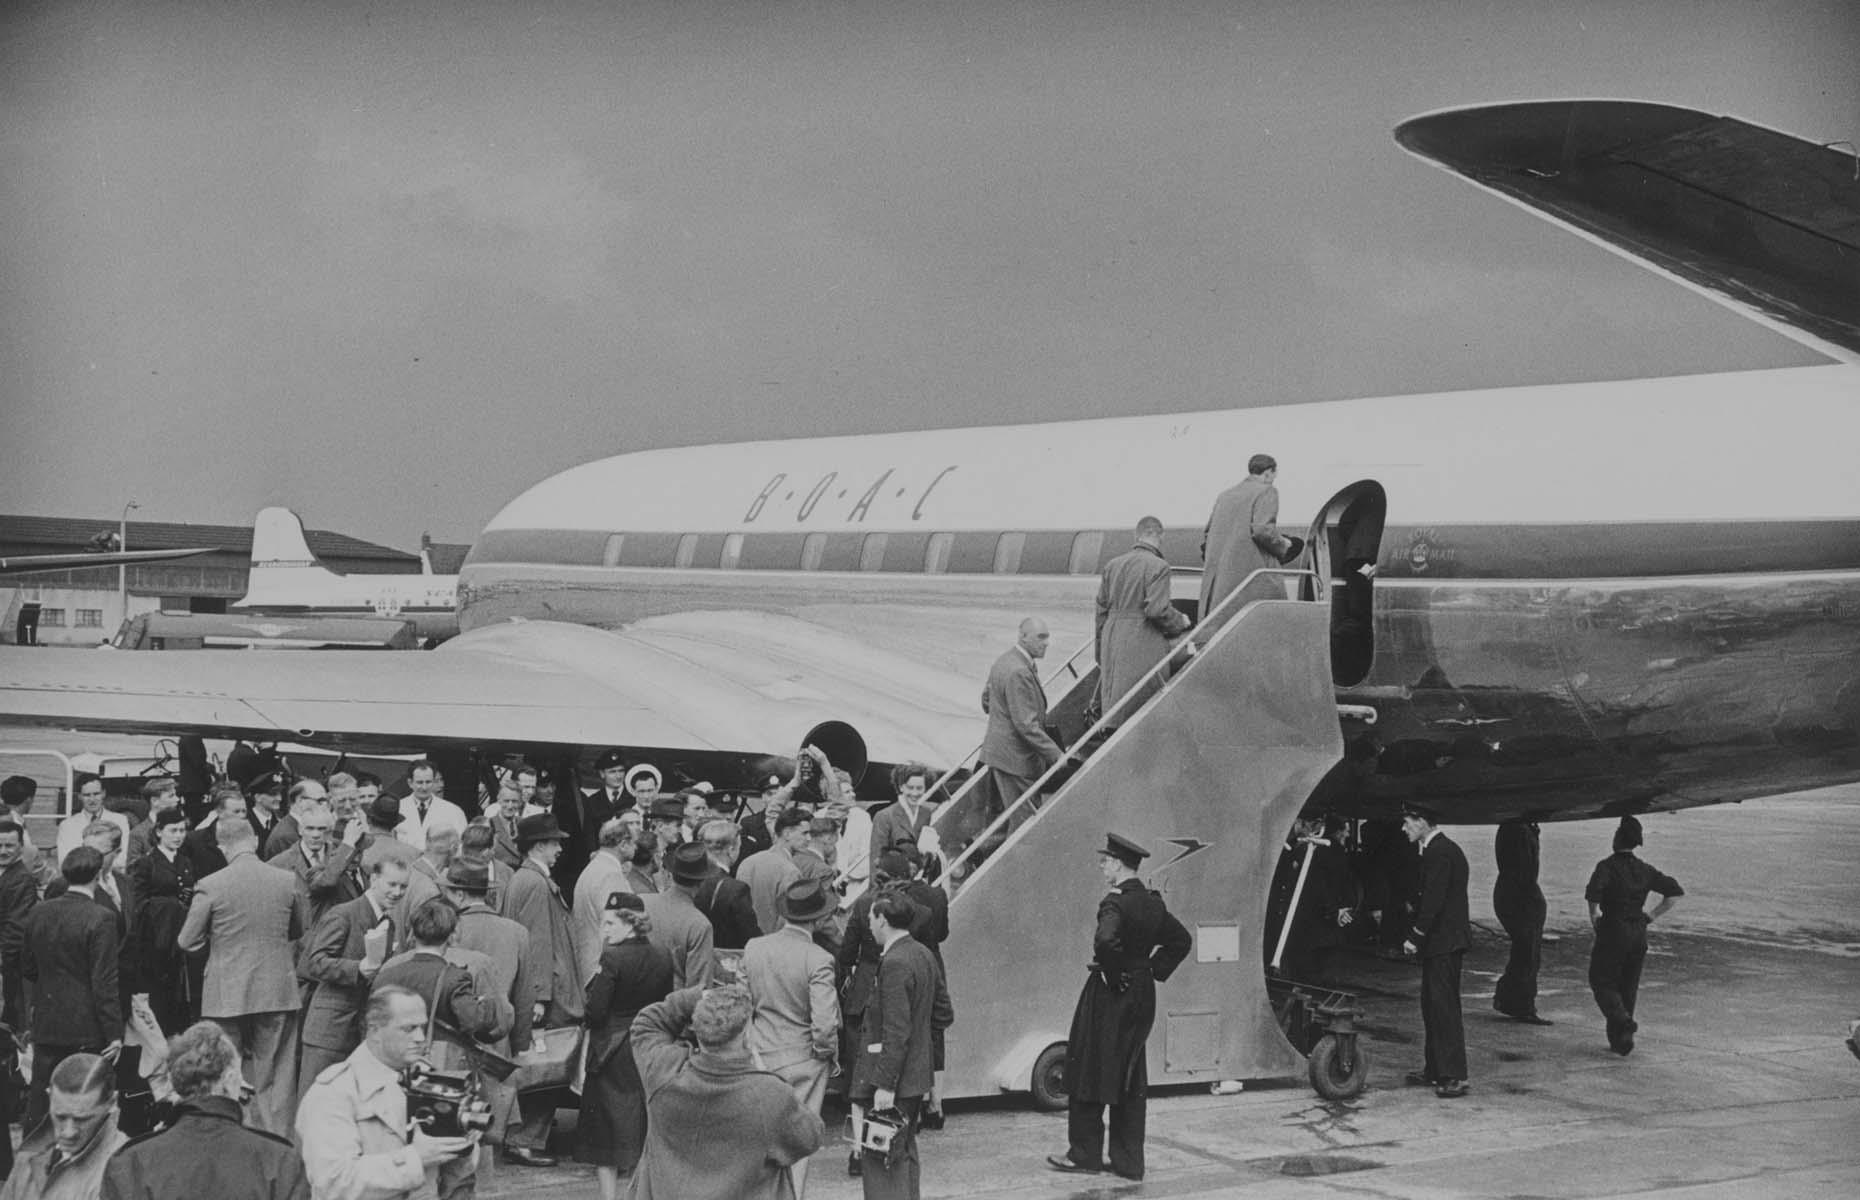 Most airliners of the time had unpressurised cabins and so were forced to fly low, going through the weather rather than above it, making for a frequently uncomfortable experience. However, the de Havilland Comet was a dream in comparison. With a pressurised cabin, it could fly at 40,000 feet (12.1km) allowing passengers to gaze out of its large windows to the clouds below in (relative) peace and quiet.